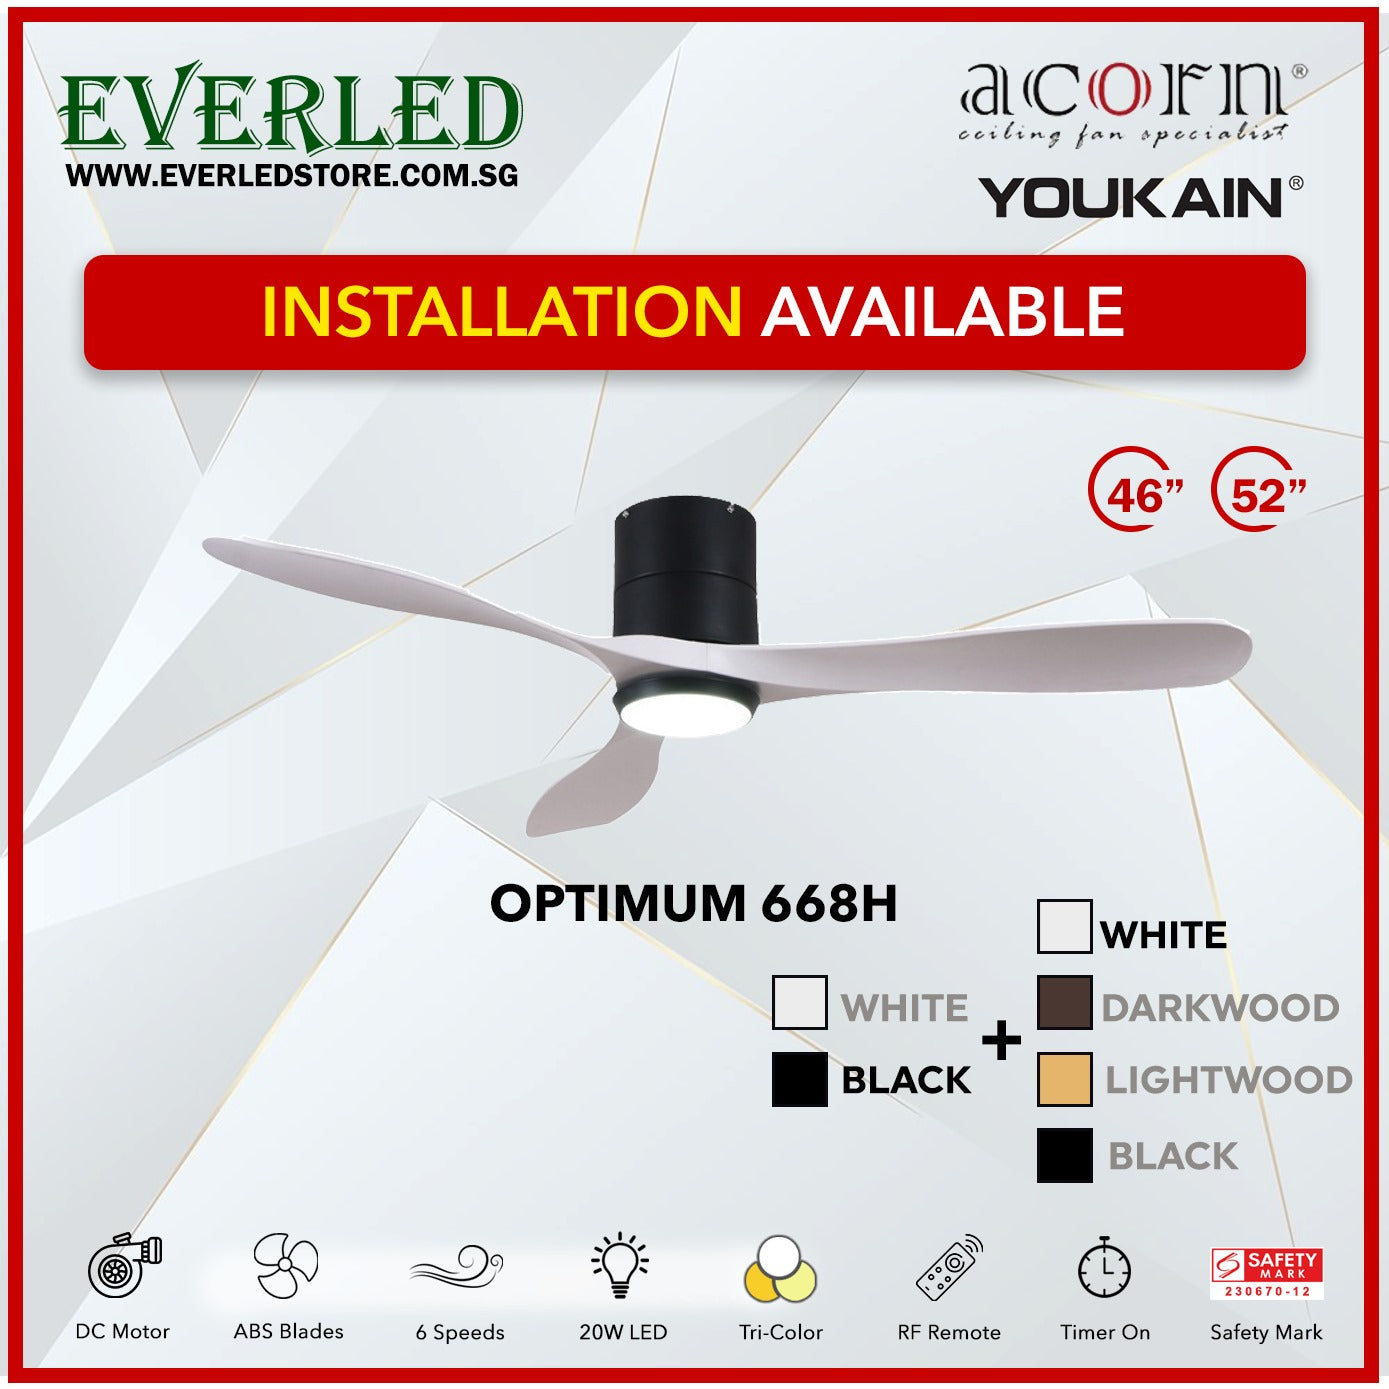 *INSTALLATION AVAILABLE* Acorn (Youkain) *SMART DC INVERTER* Optimum 668H 46"/52"  with Tri-color LED